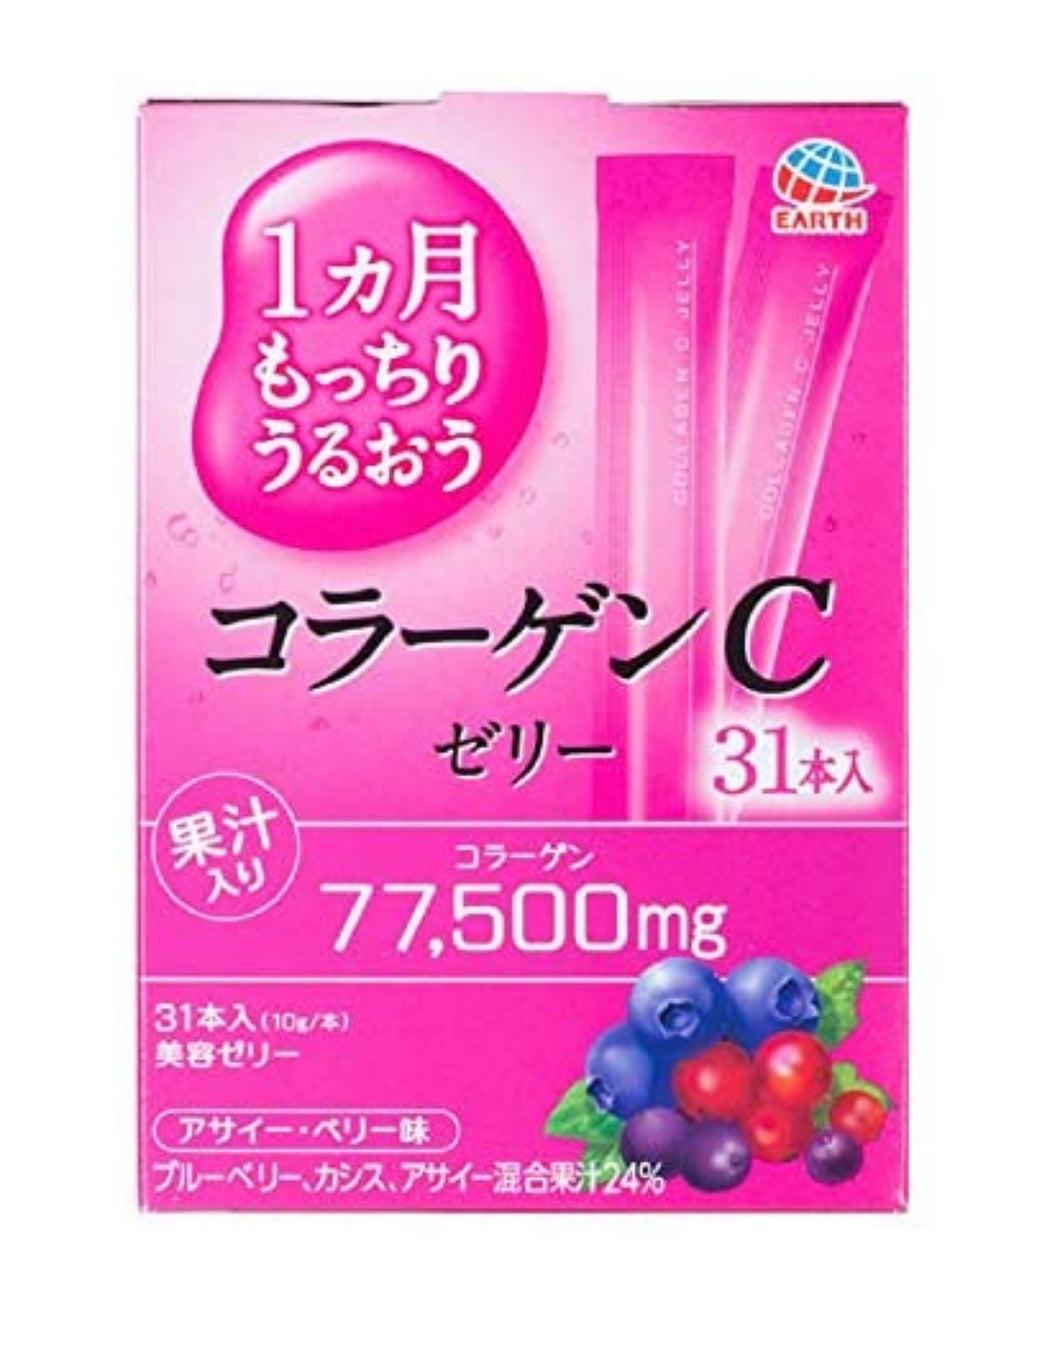 Earth Collagen C Jelly 31 pouches